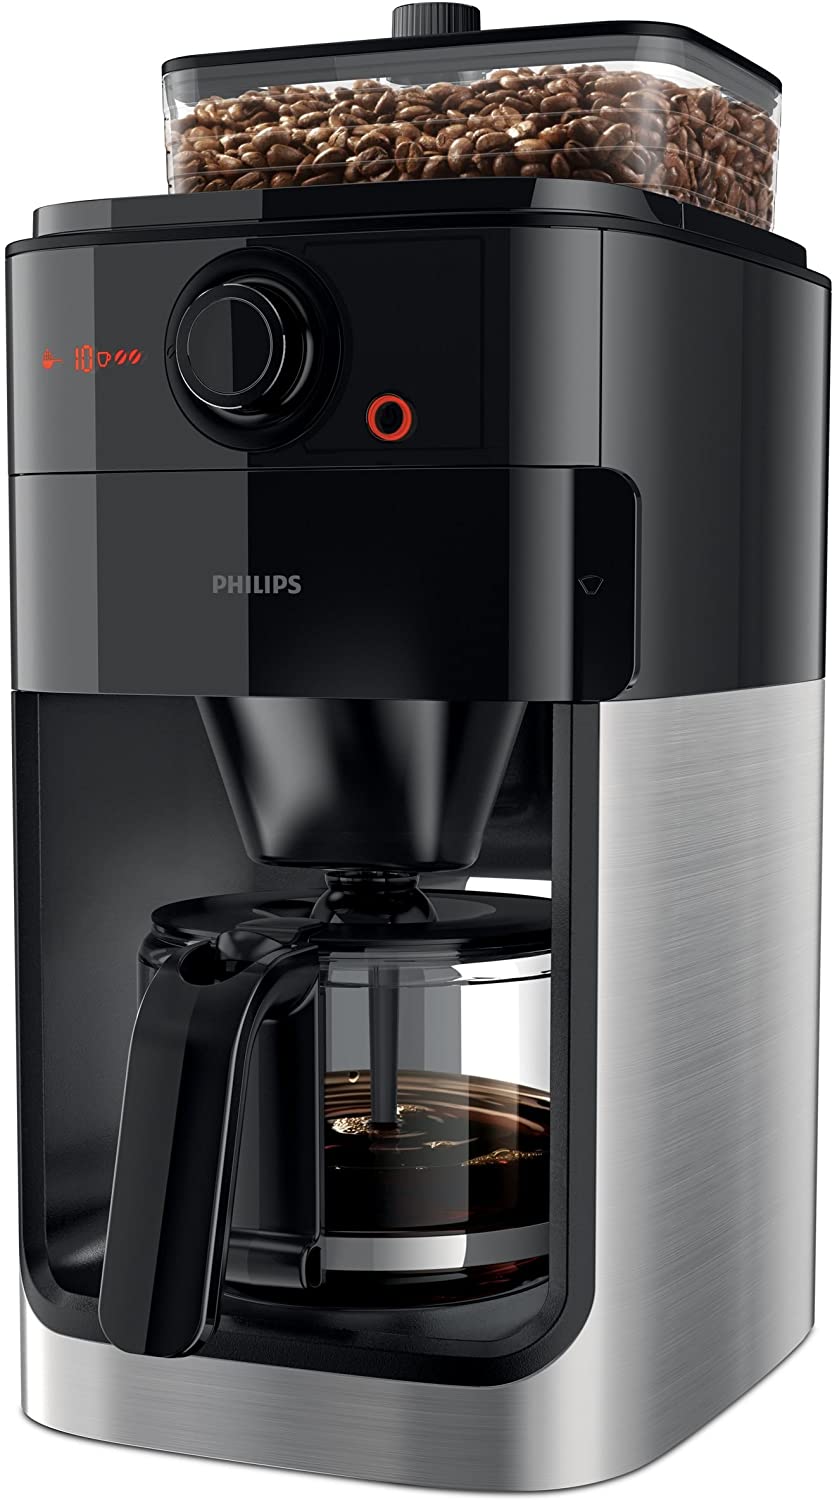 Philips HD7767 / 00 Grind and Brew Filter coffee machine, plastic, stainless steel / black